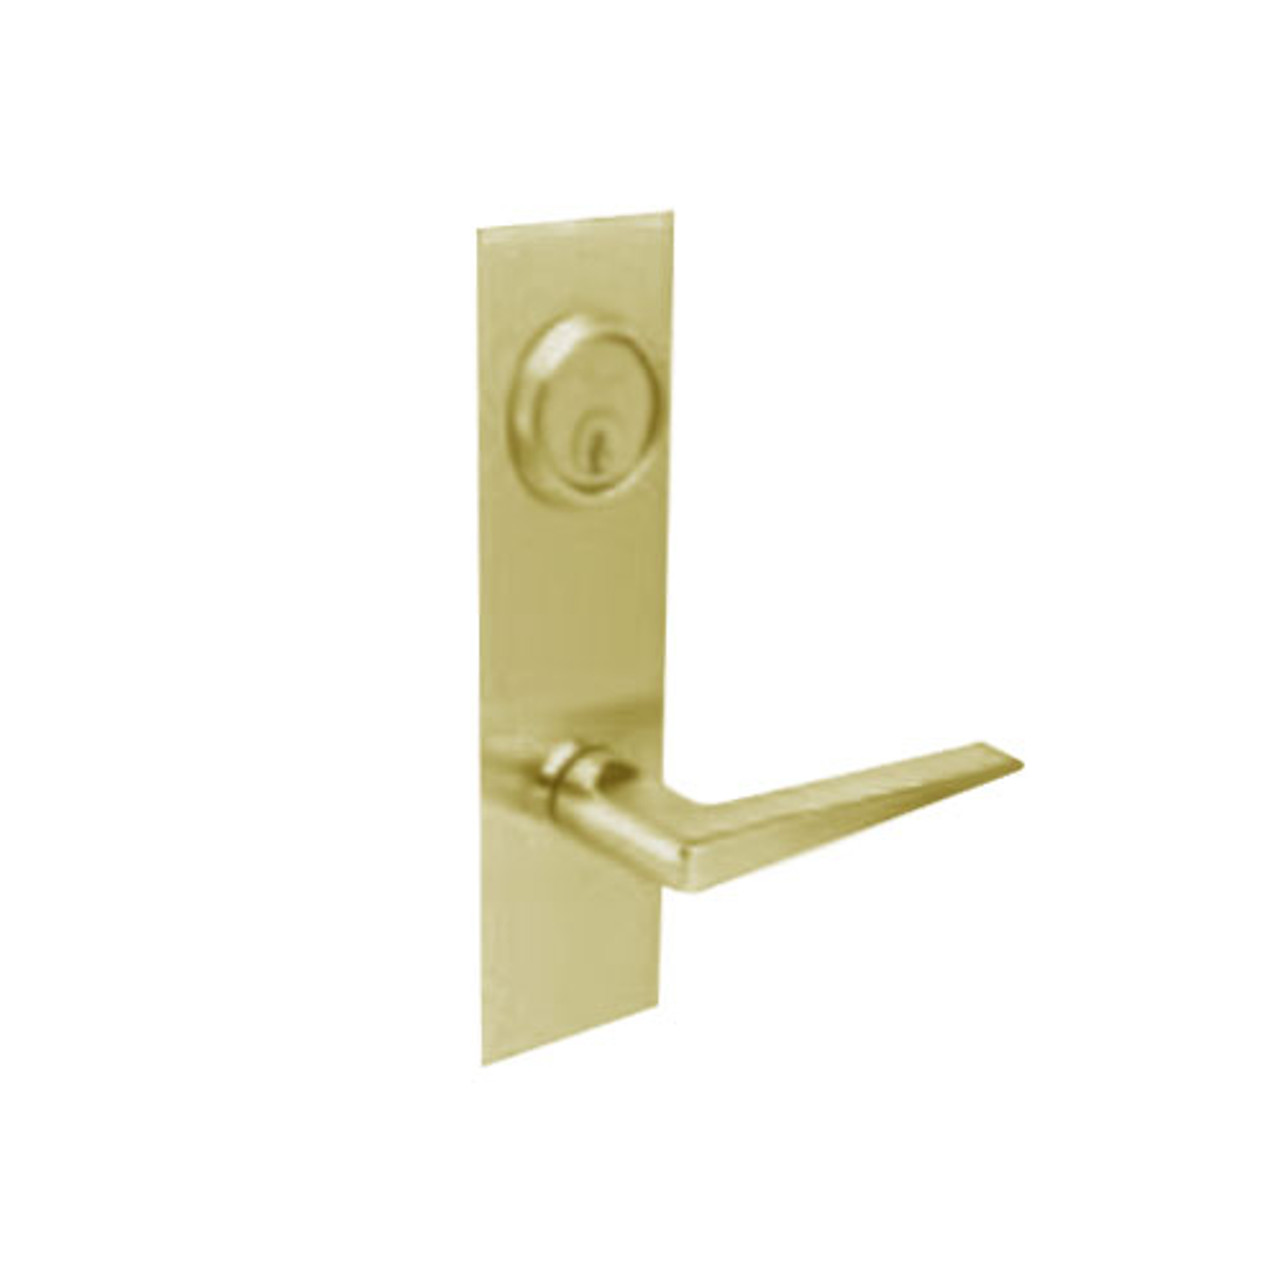 BM08-JH-04 Arrow Mortise Lock BM Series Single Dummy Lever with Javelin Design and H Escutcheon in Satin Brass